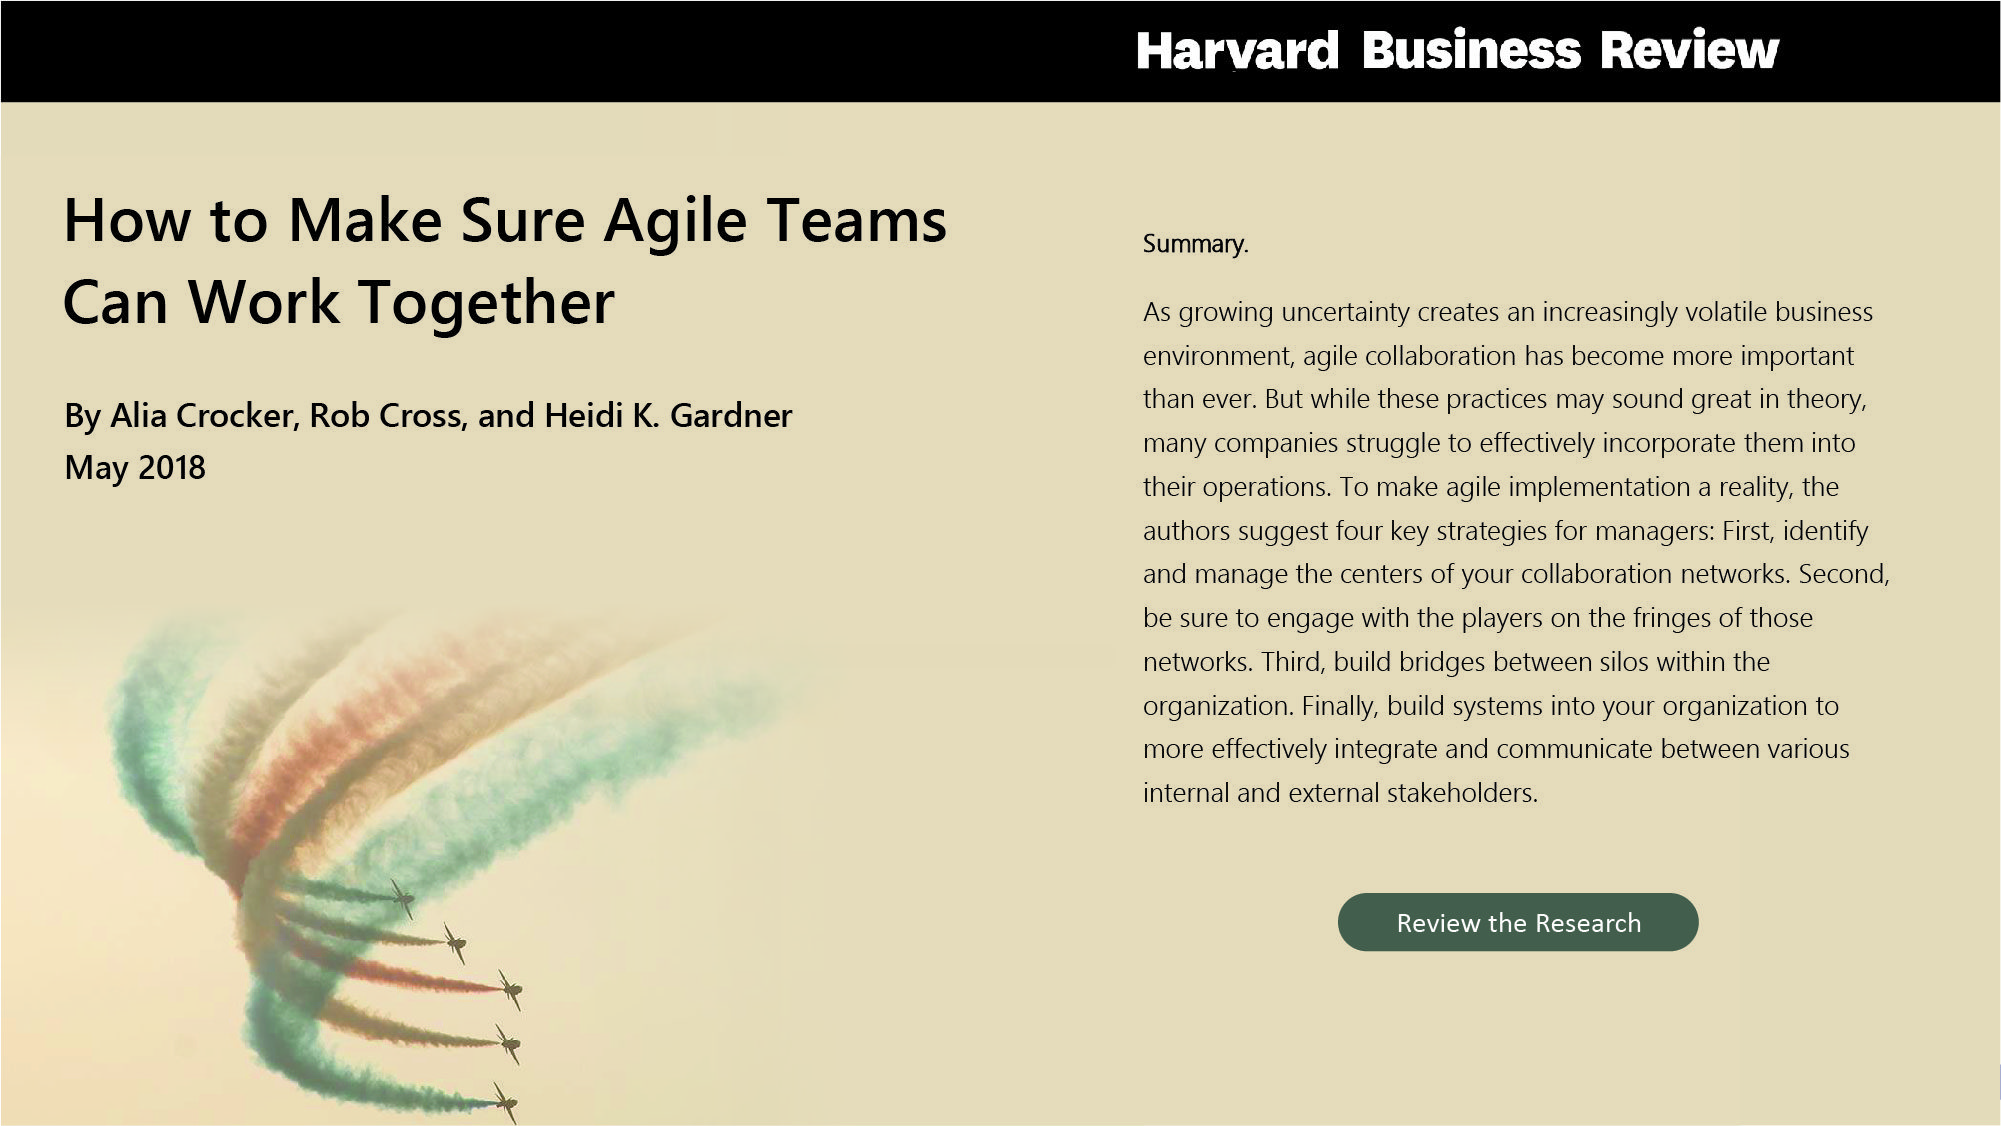 How to make sure agile teams can work together